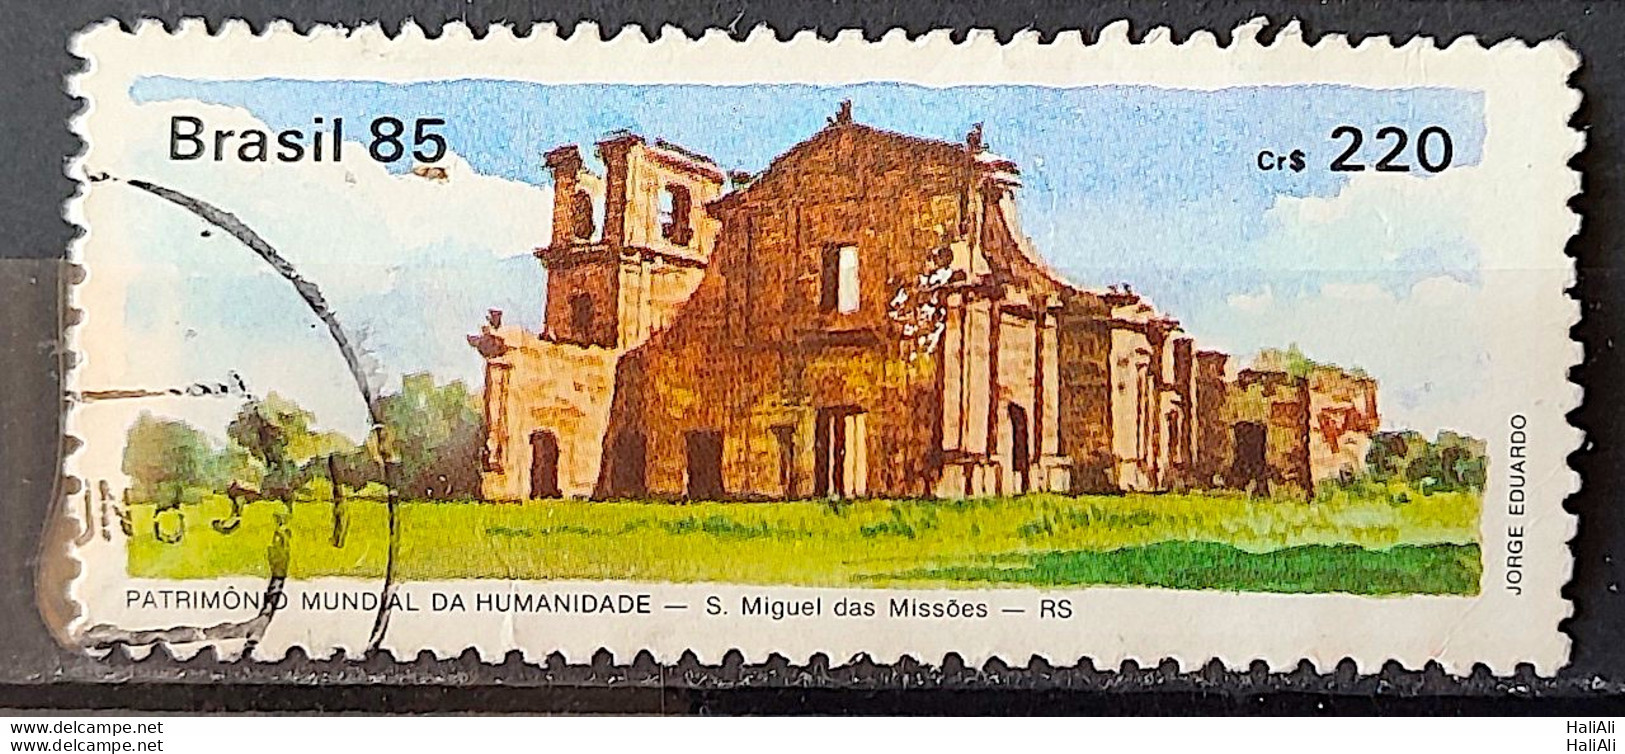 C 1448 Brazil Stamp World Heritage Of Humanity Sao Miguel Das Missoes 1985 Circulated 1 - Usati